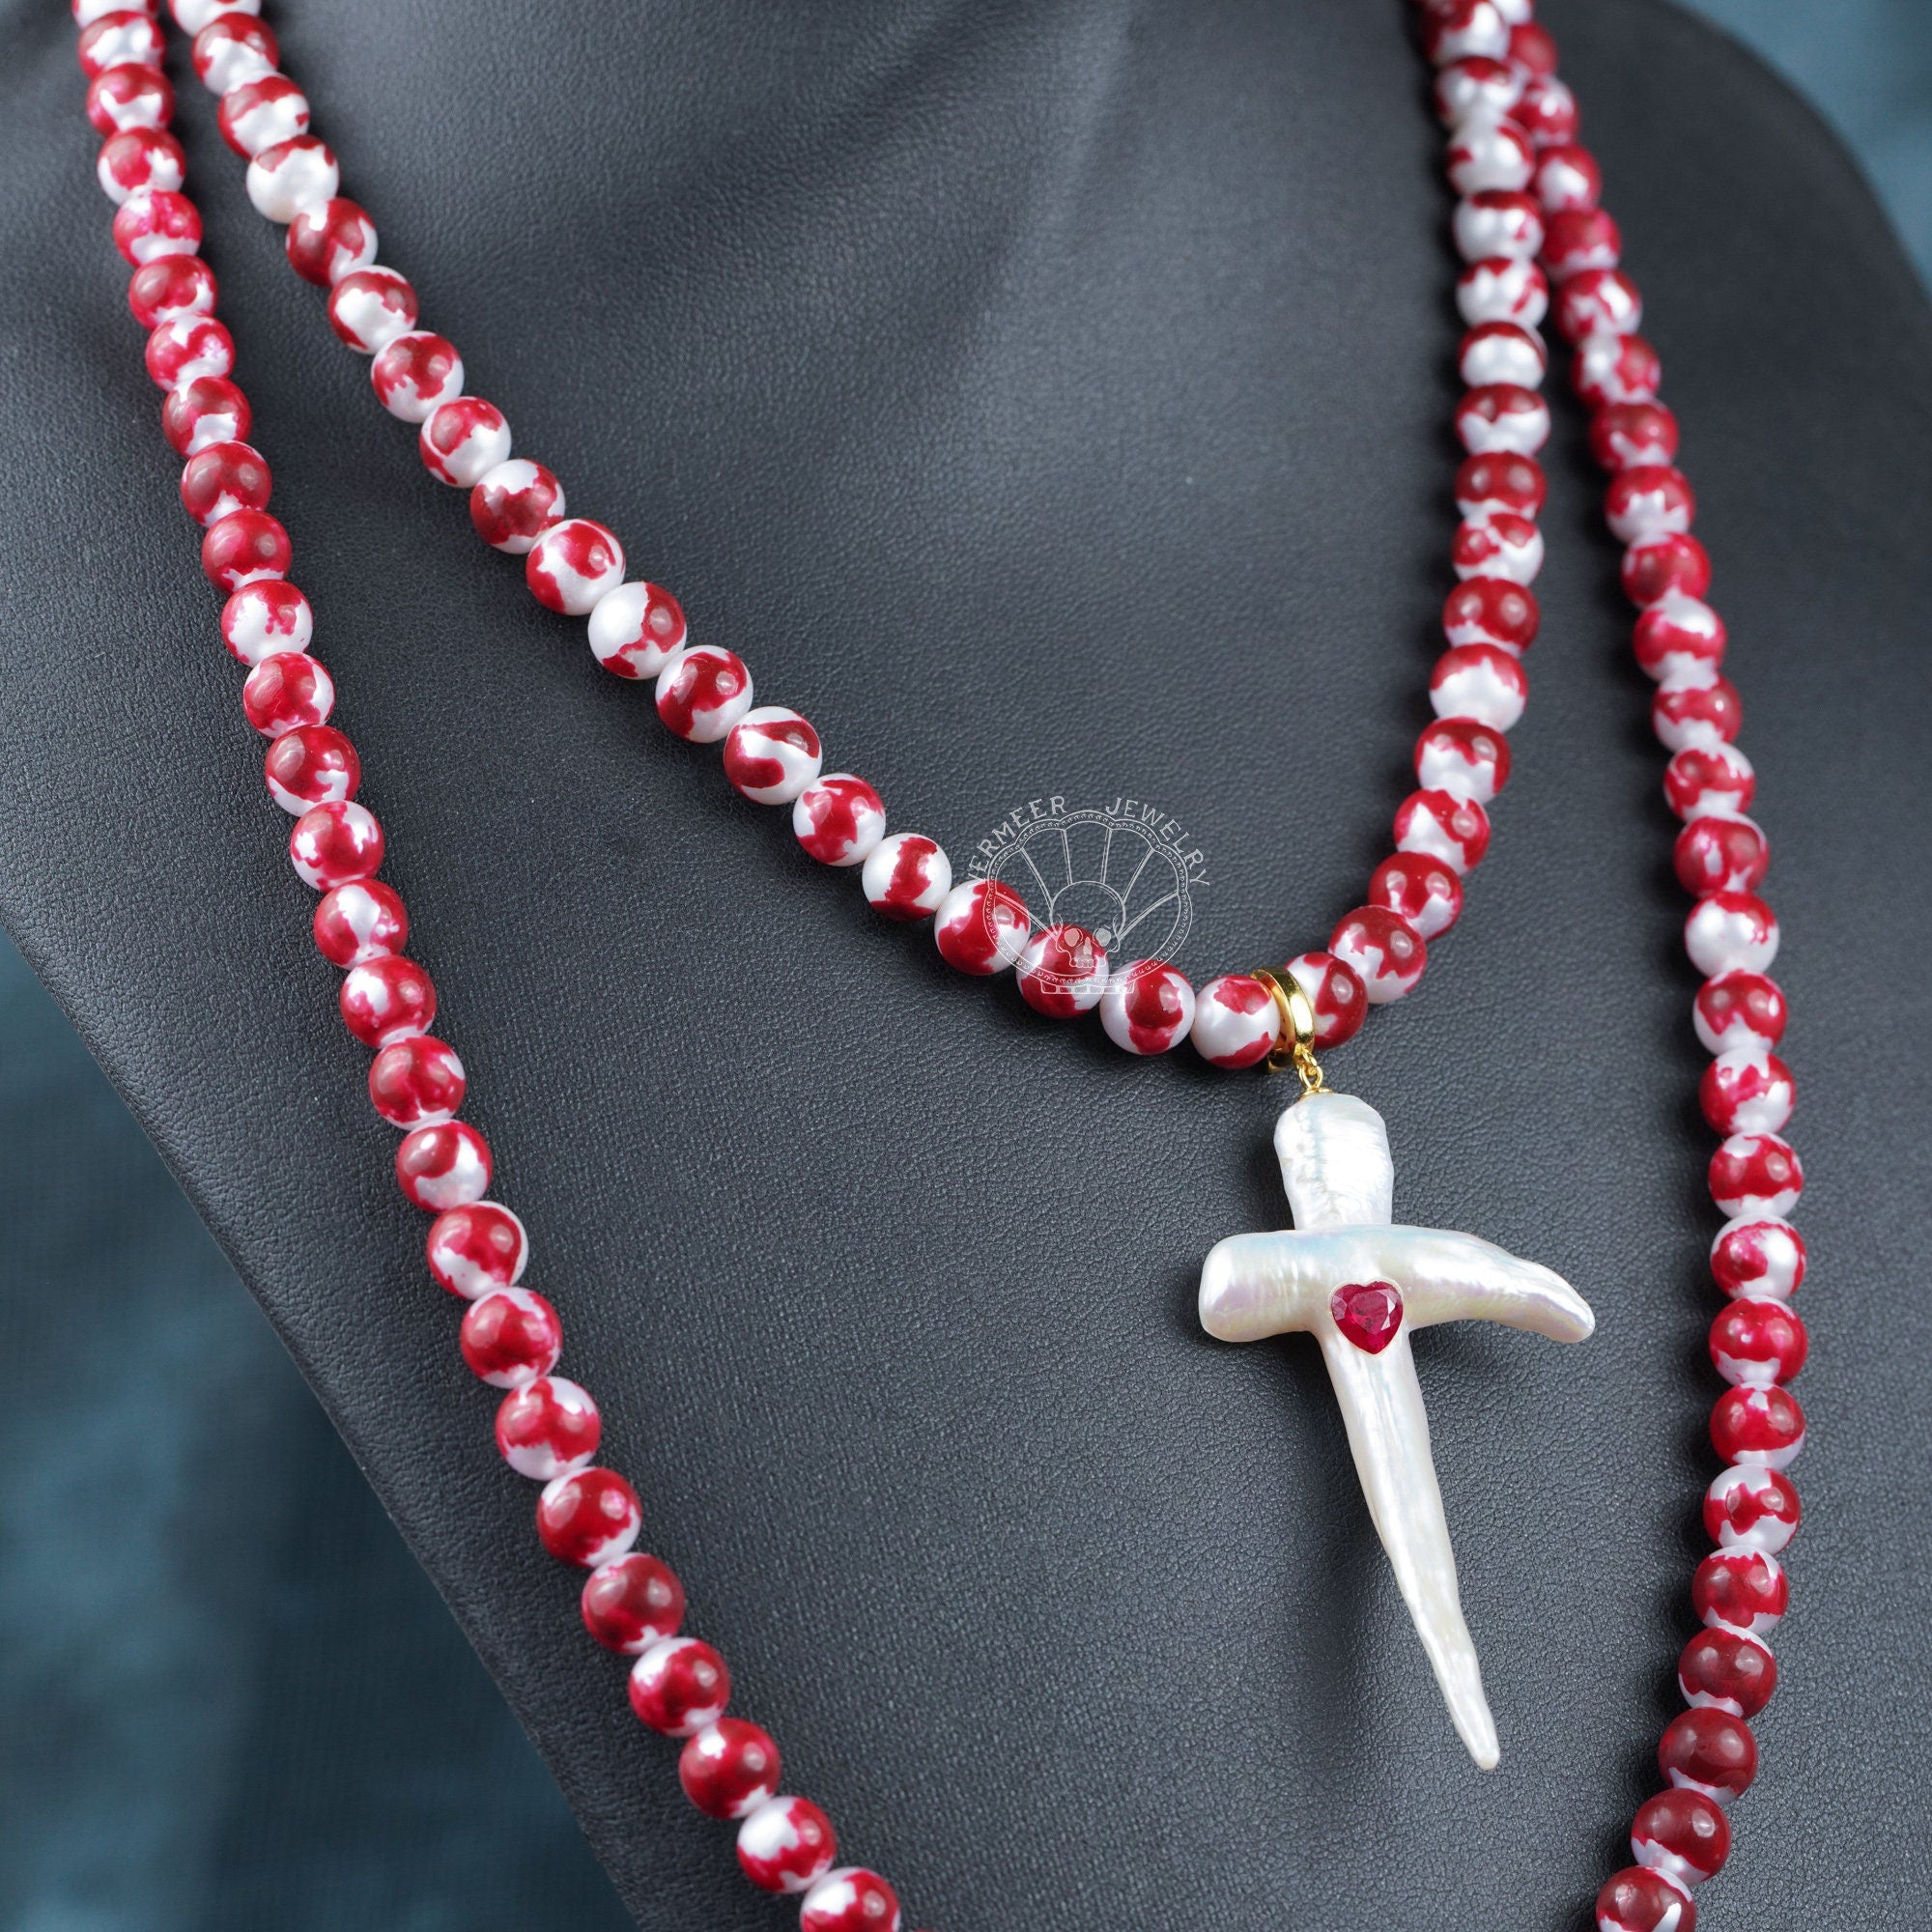 blood pearl necklace with a natural cross shape pearl set with ruby cool for party Halloween gift